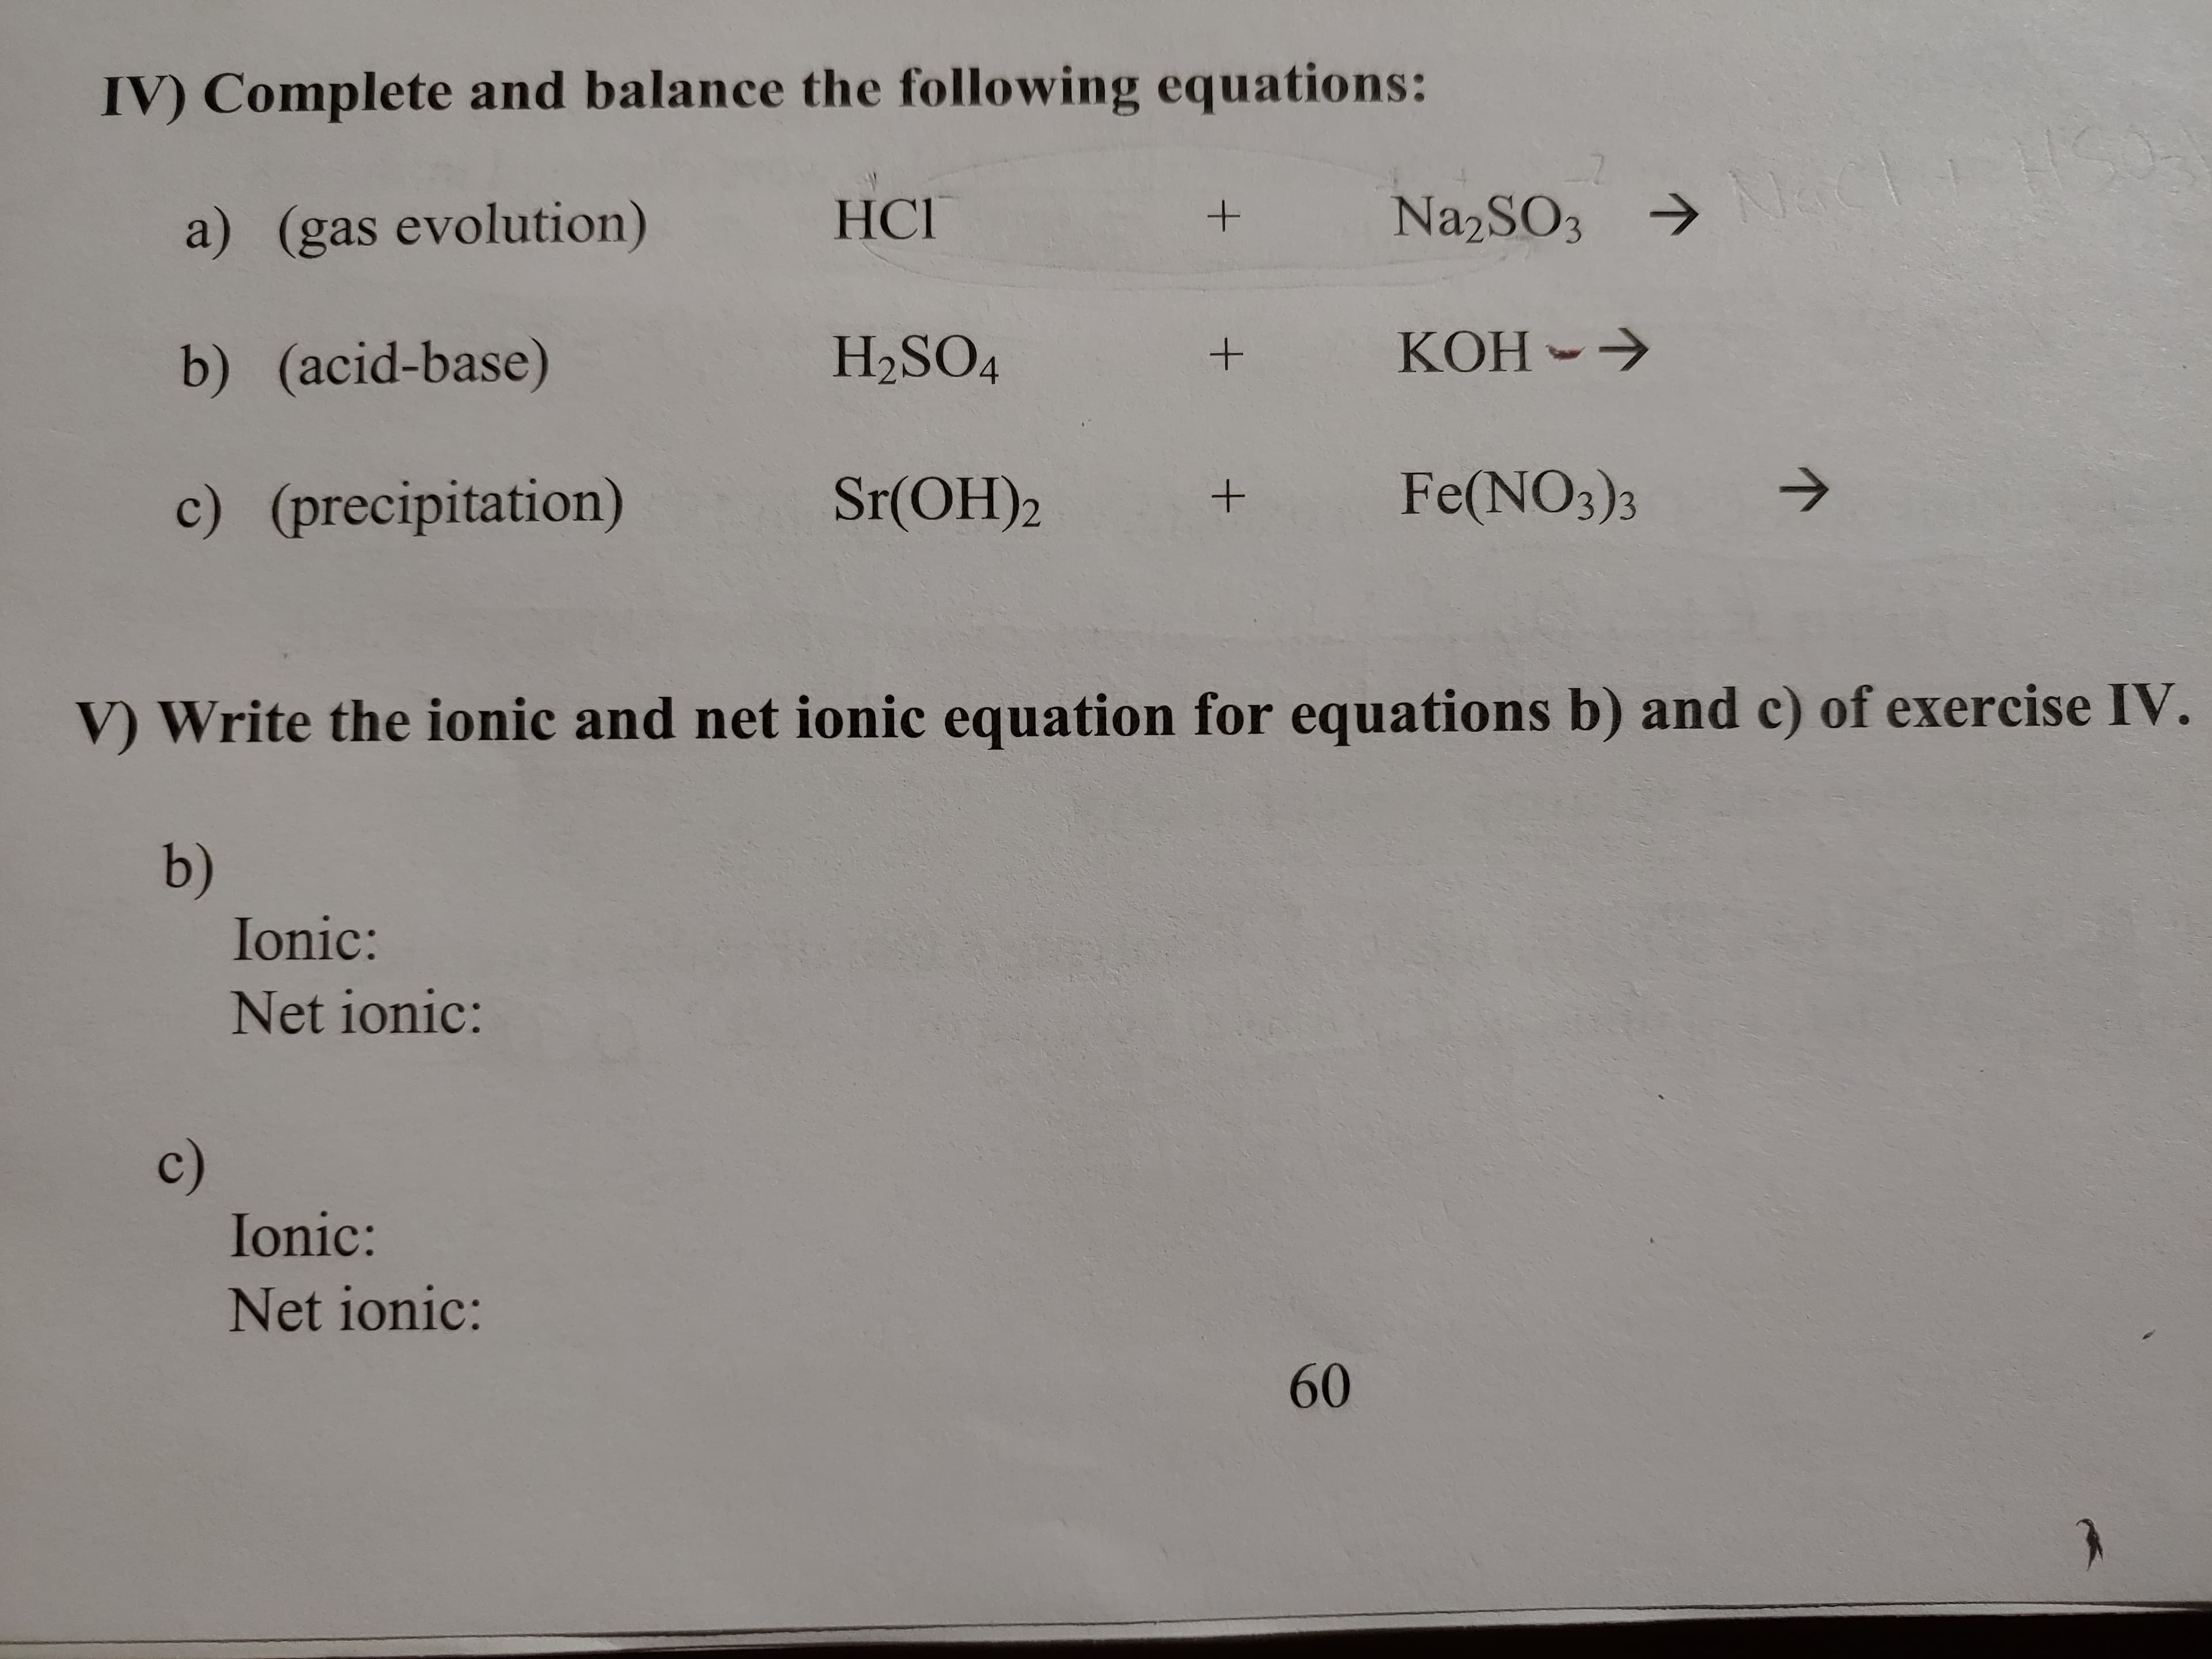 IV) Complete and balance the following equations:
N1aC
Na2SO3
HСГ
a) (gas evolution)
KOH
H2SO4
b) (acid-base)
Fe(NO3)3
Sr(OH)2
c) (precipitation)
V Write the ionic and net ionic equation for equations b) and c) of exercise IV.
b)
Ionic:
Net ionic:
с)
Ionic:
Net ionic:
60
+
+
